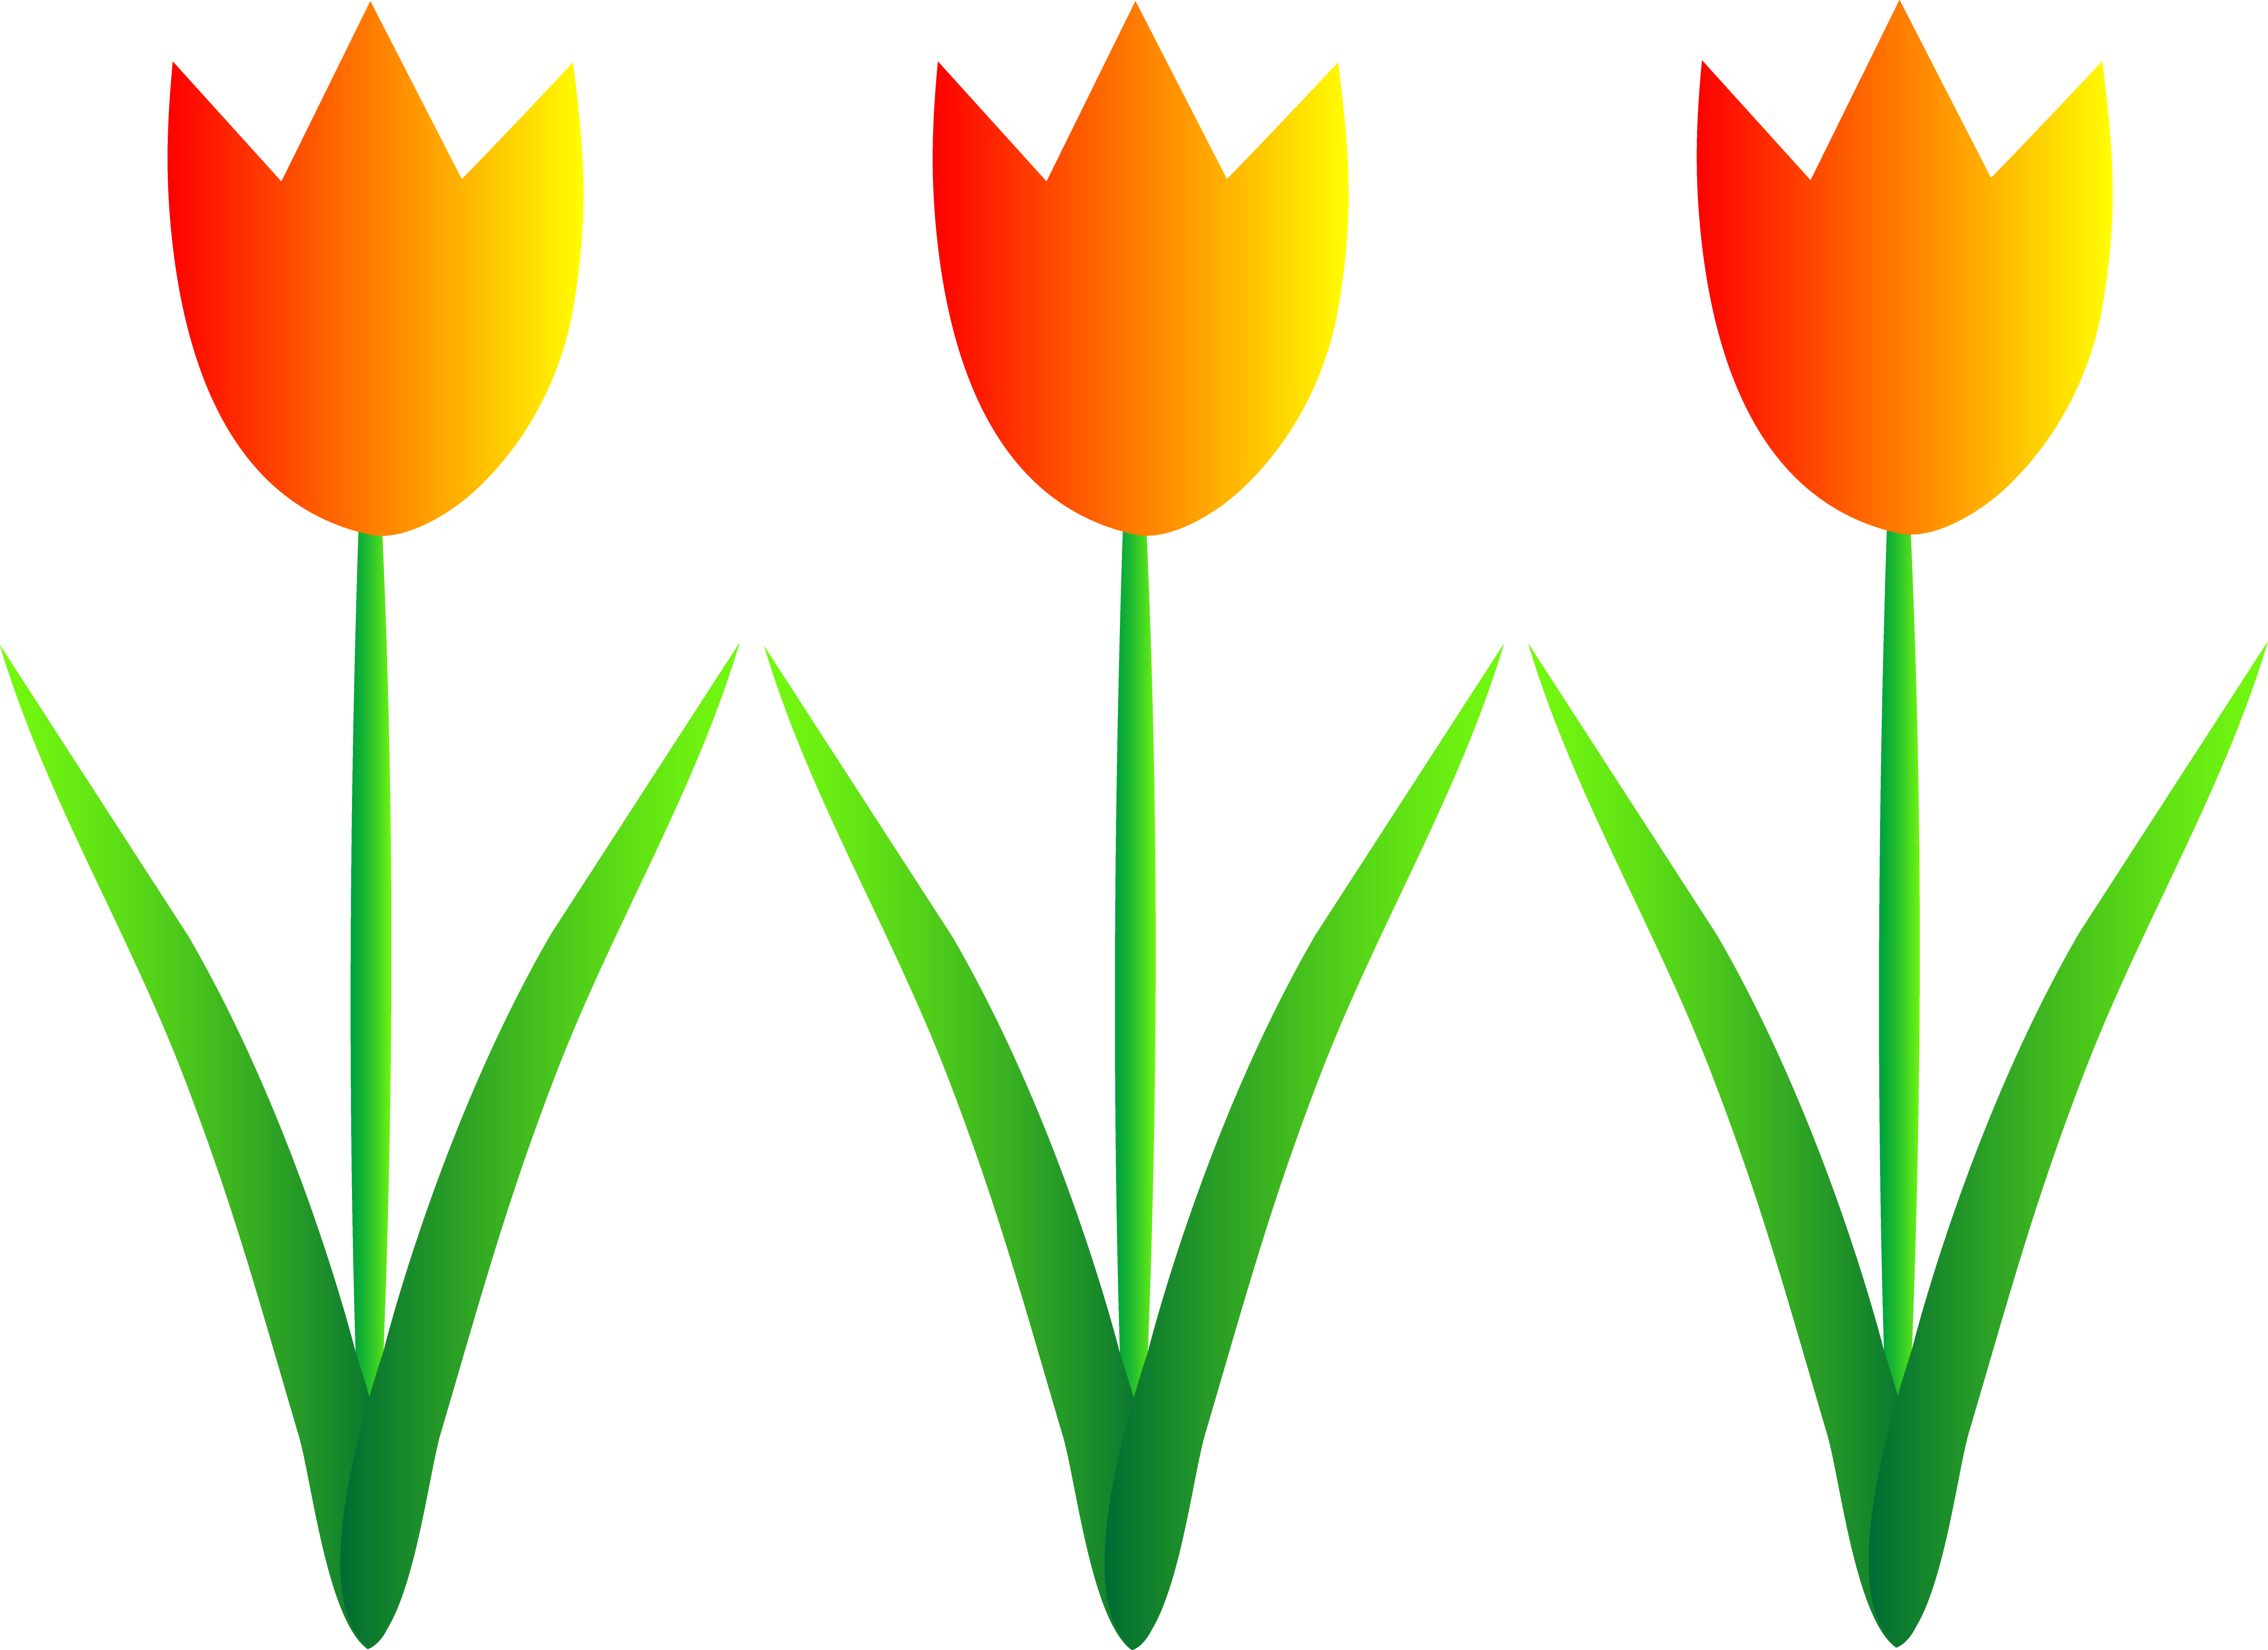 Three Colorful Spring Tulips Free Clip Art Downloads Images ...